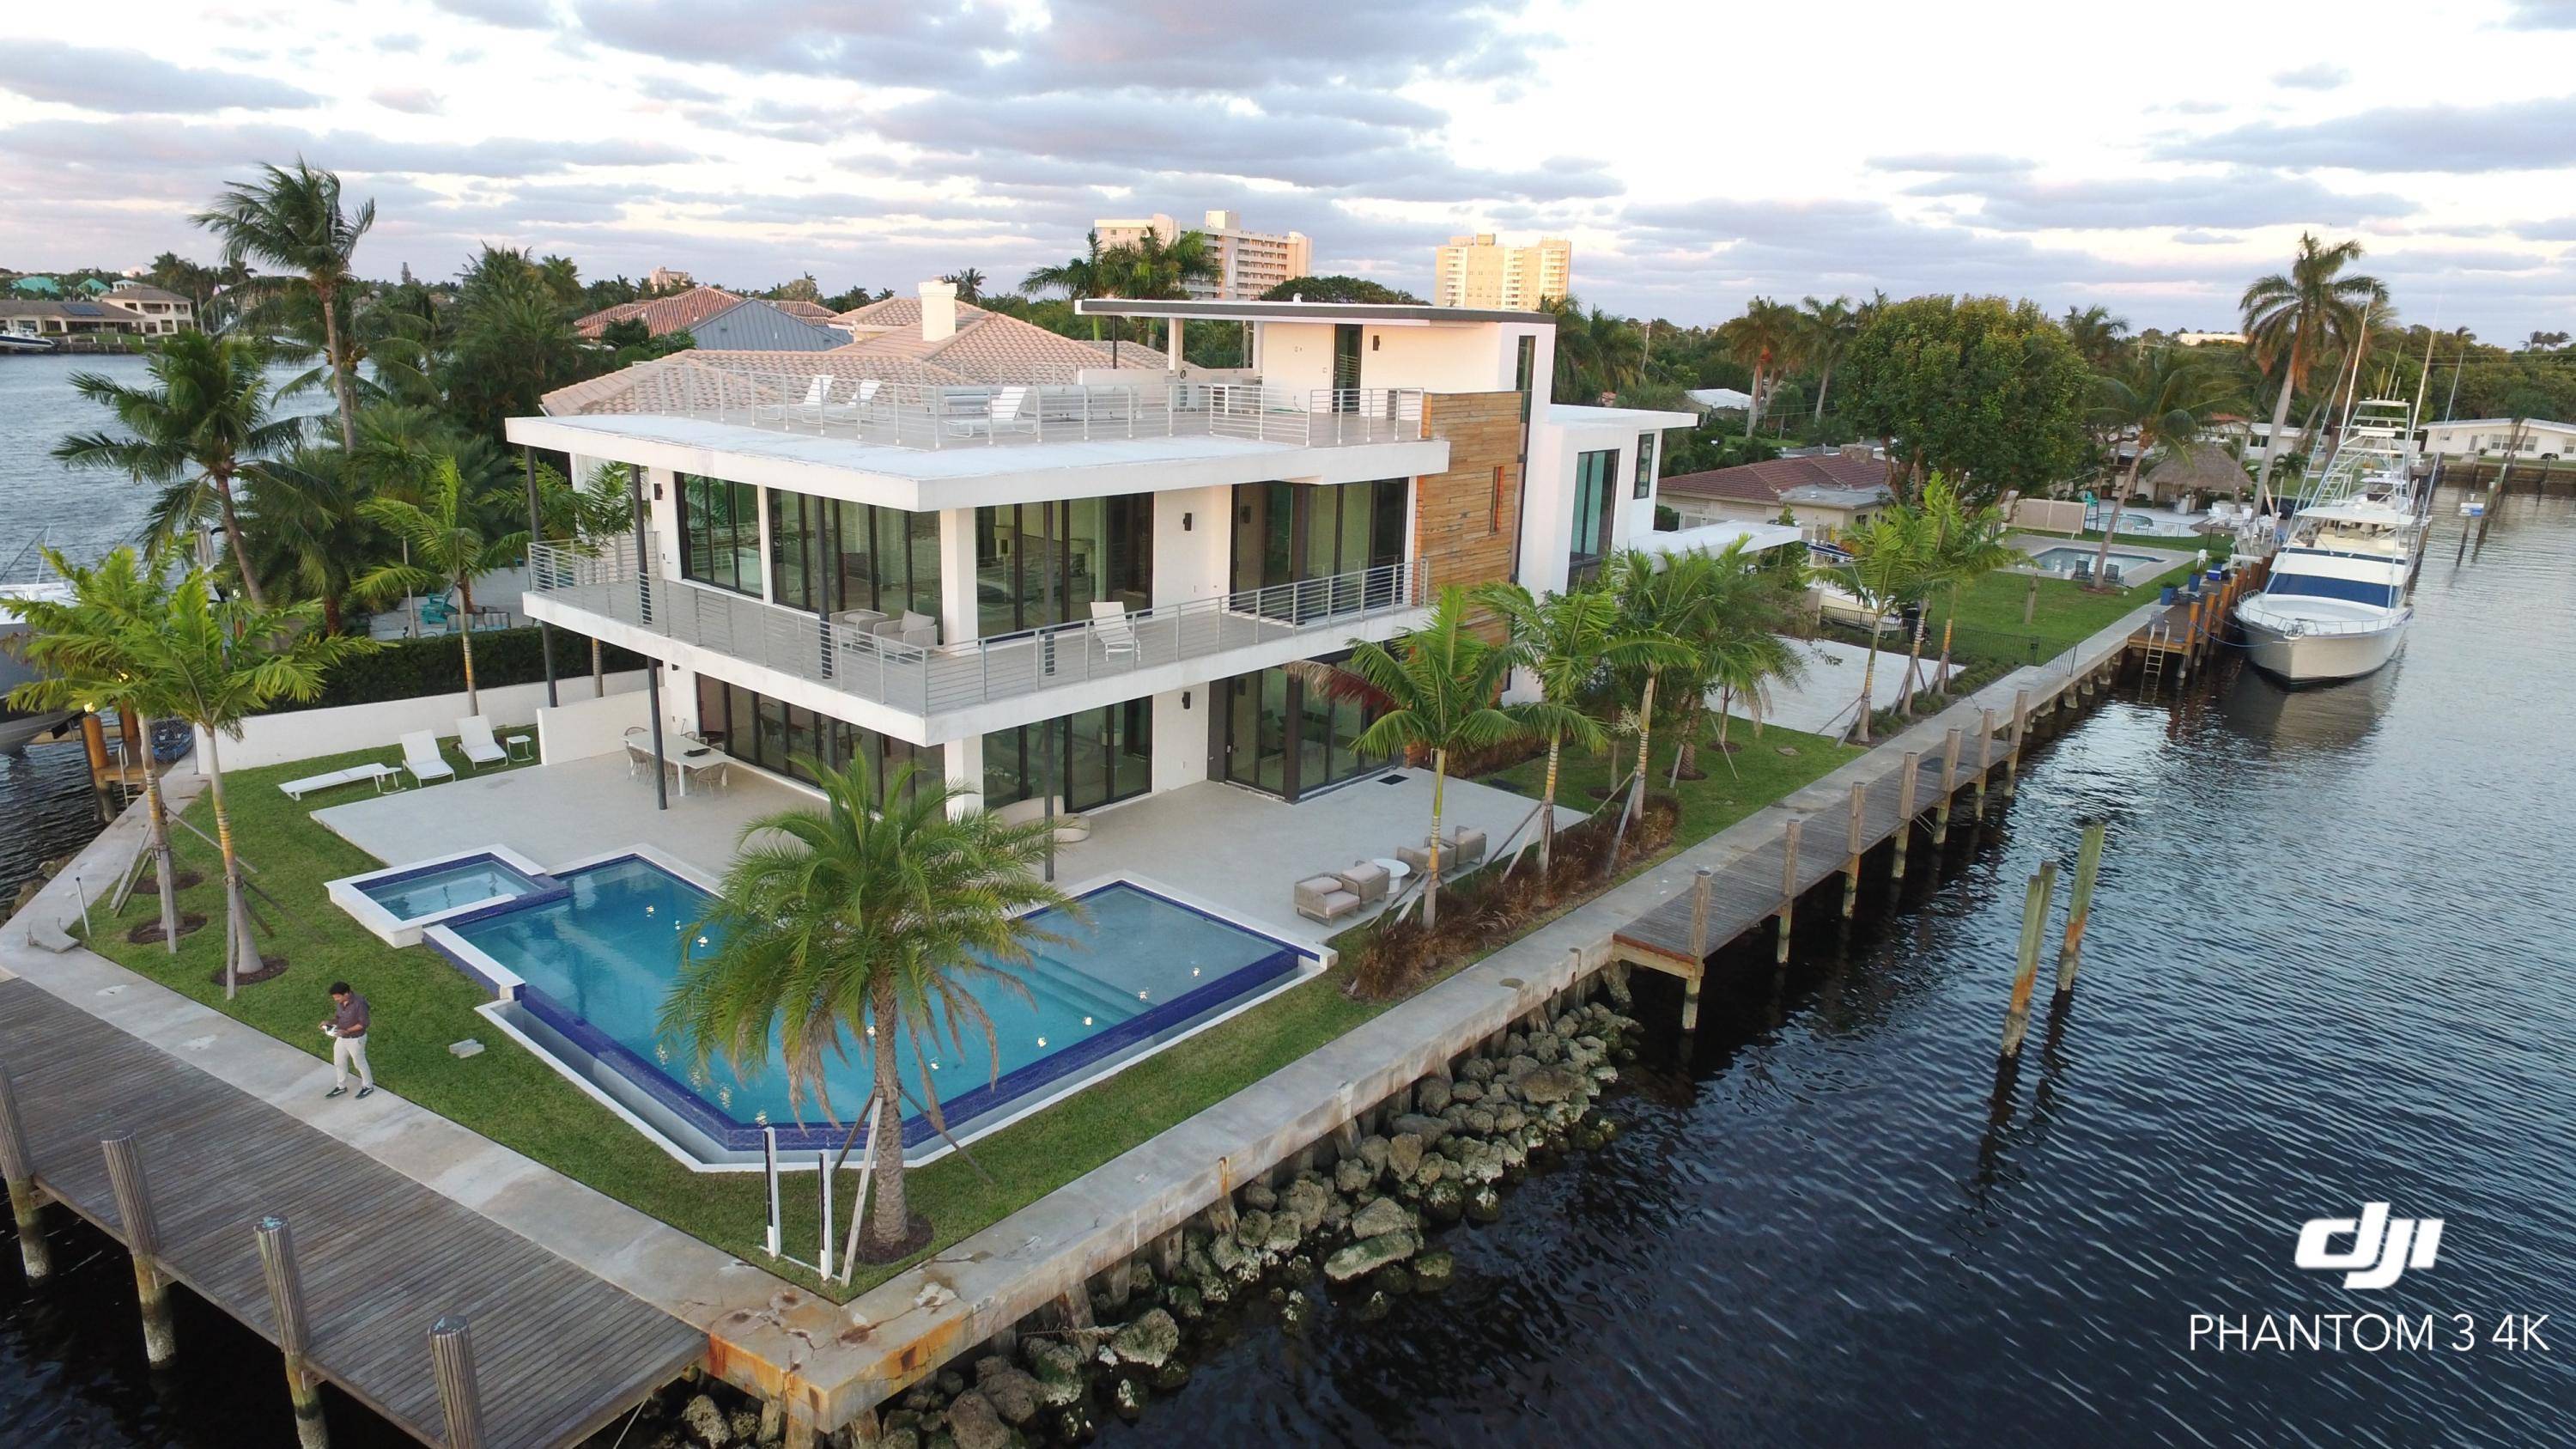 Unique opportunity to enjoy this New 3 levels Modern Intracoastal Point Lot property planted on 240 feet water frontage in Hillsboro Shores.